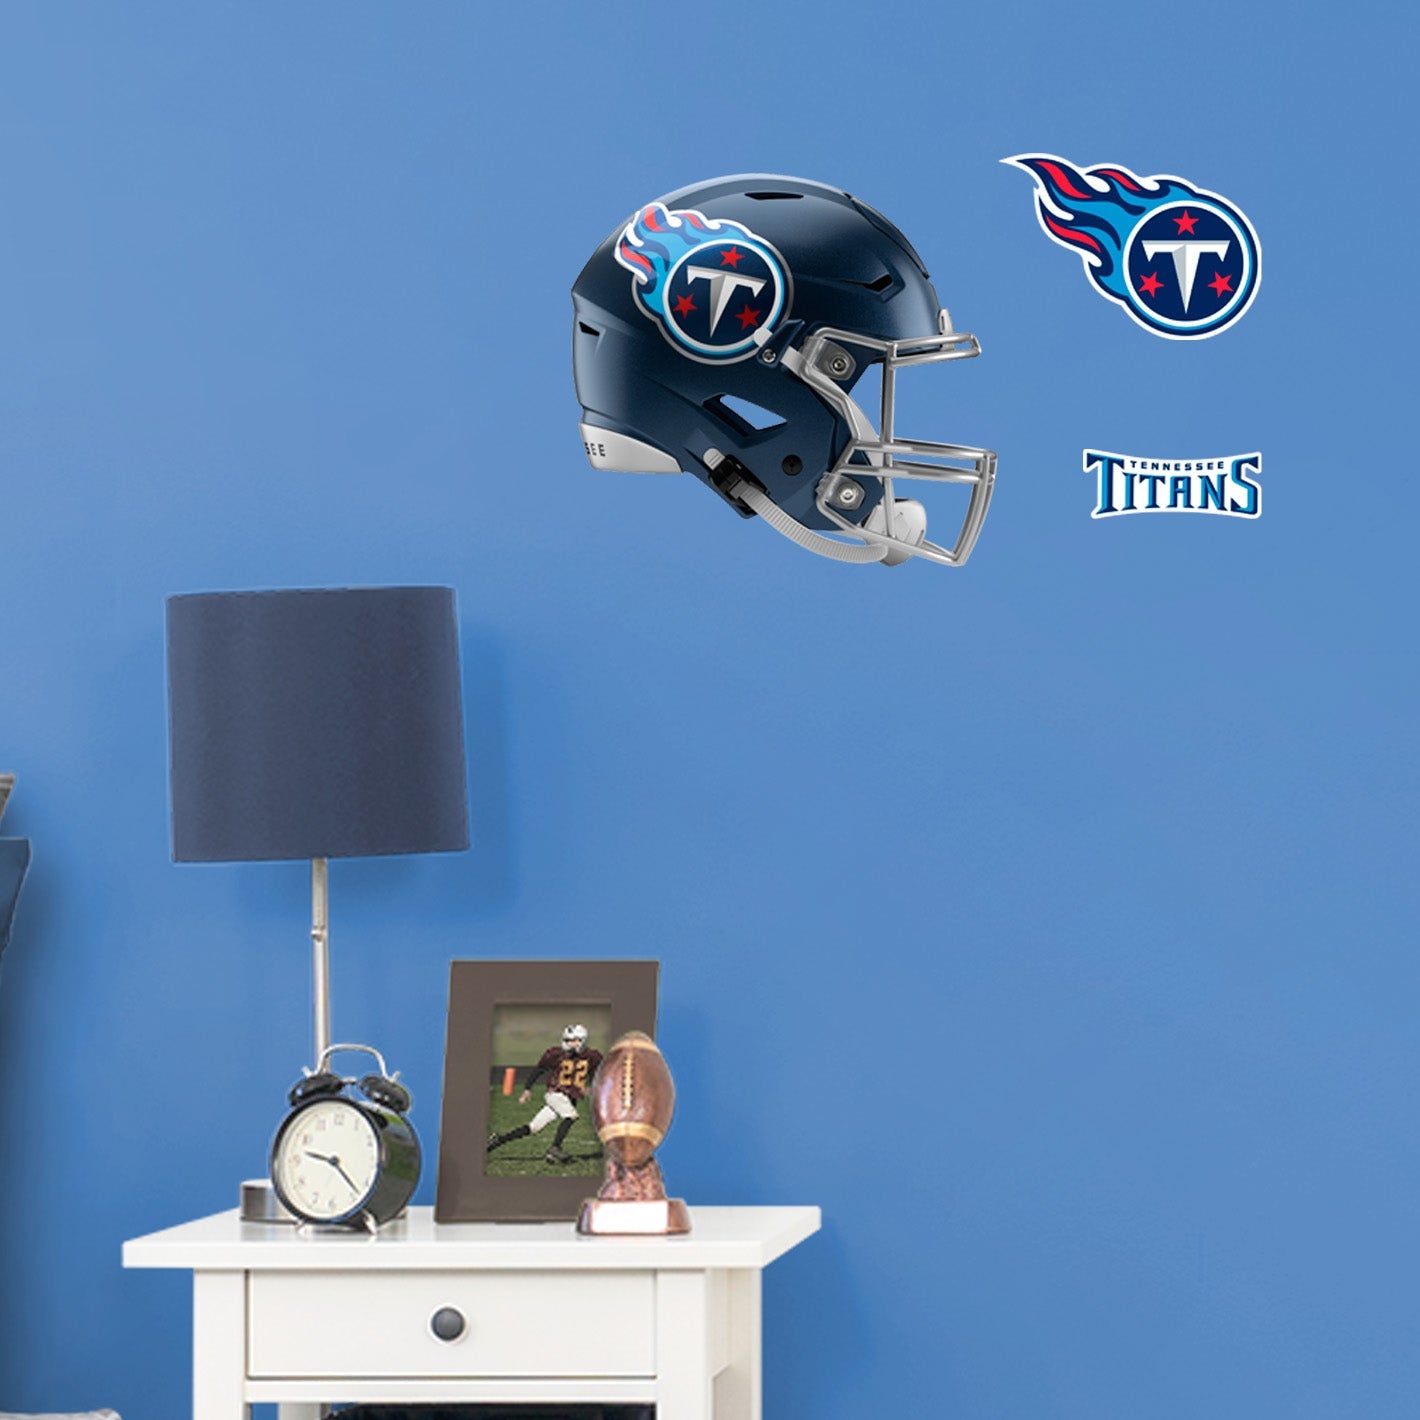 Tennessee Titans: Helmet - Officially Licensed NFL Removable Adhesive Decal